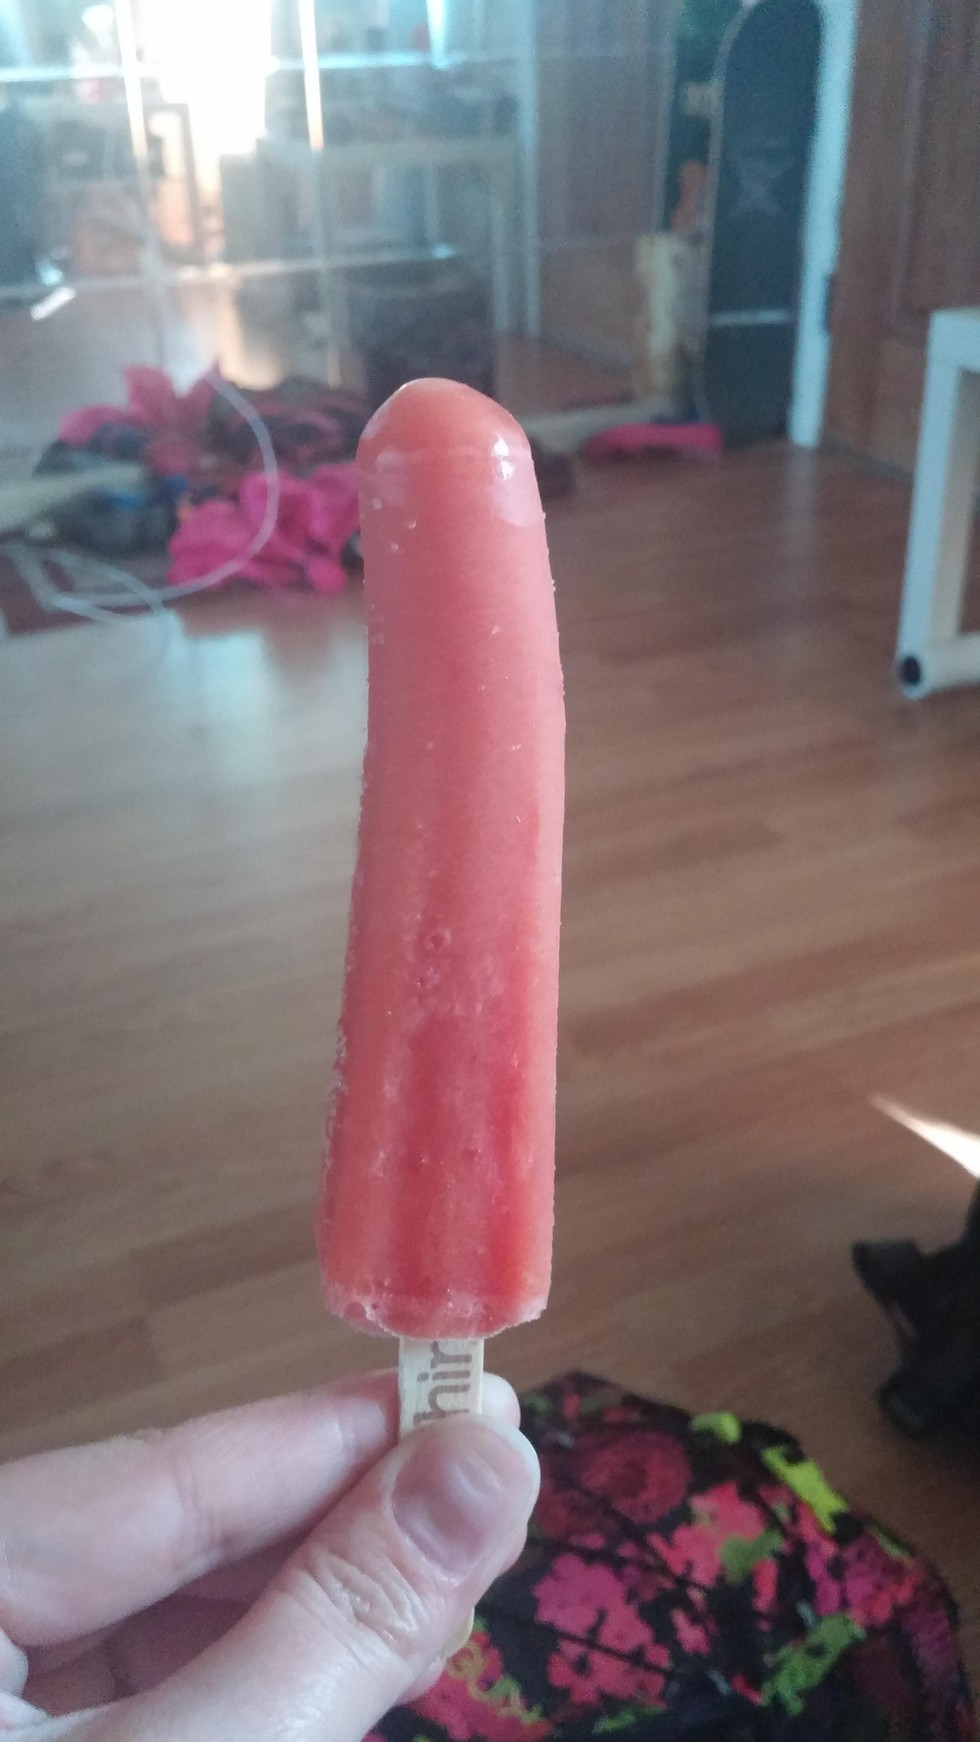 39 pictures that prove you have a dirty mind